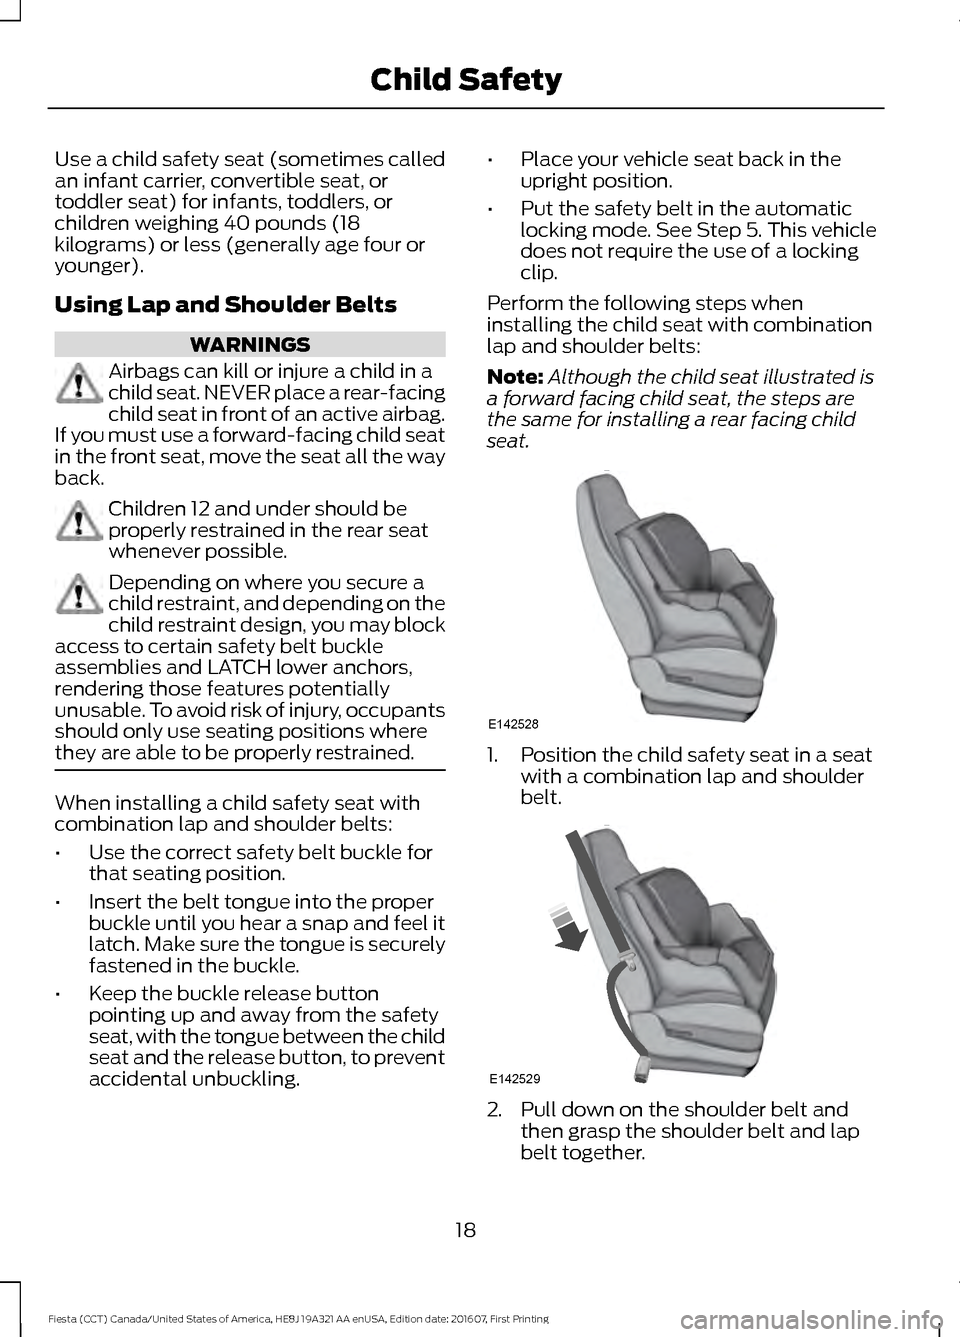 FORD FIESTA 2017 6.G Owners Manual Use a child safety seat (sometimes called
an infant carrier, convertible seat, or
toddler seat) for infants, toddlers, or
children weighing 40 pounds (18
kilograms) or less (generally age four or
youn